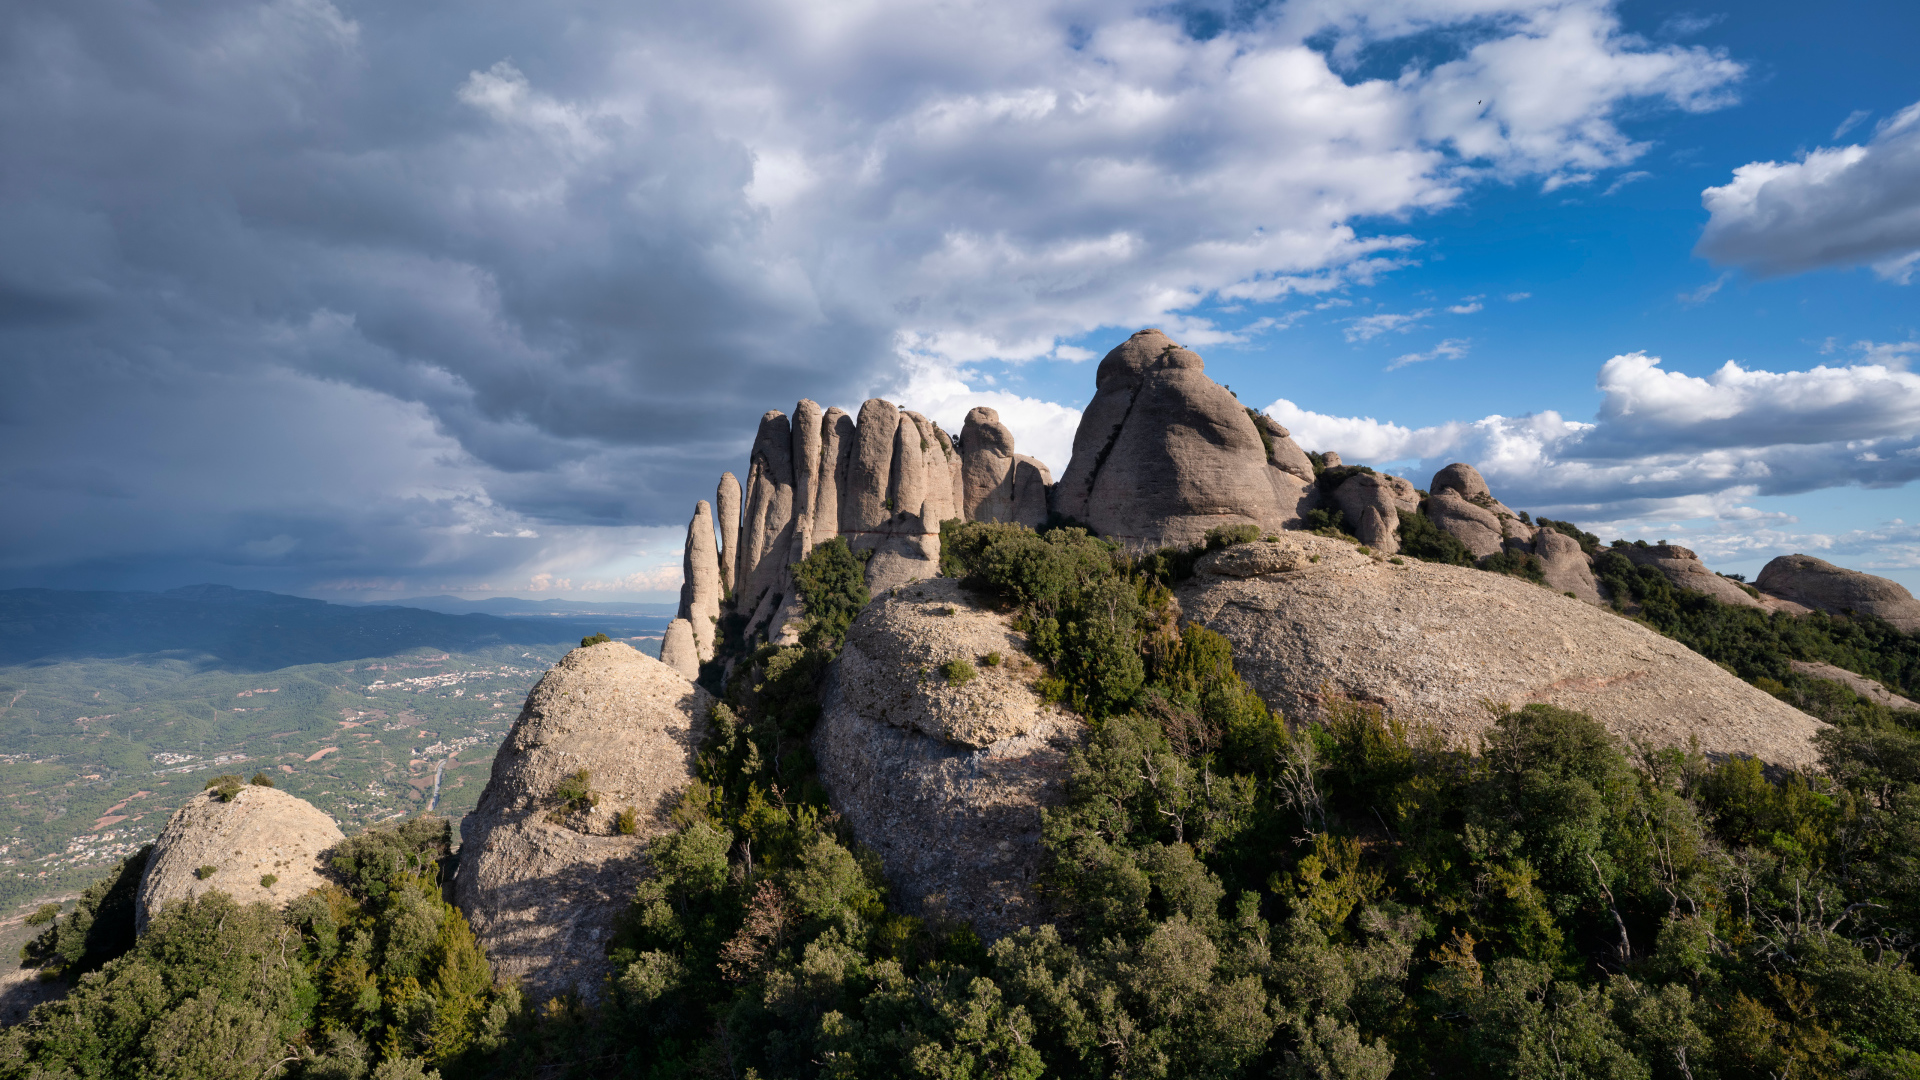 Boulders under the blue sky with storm clouds